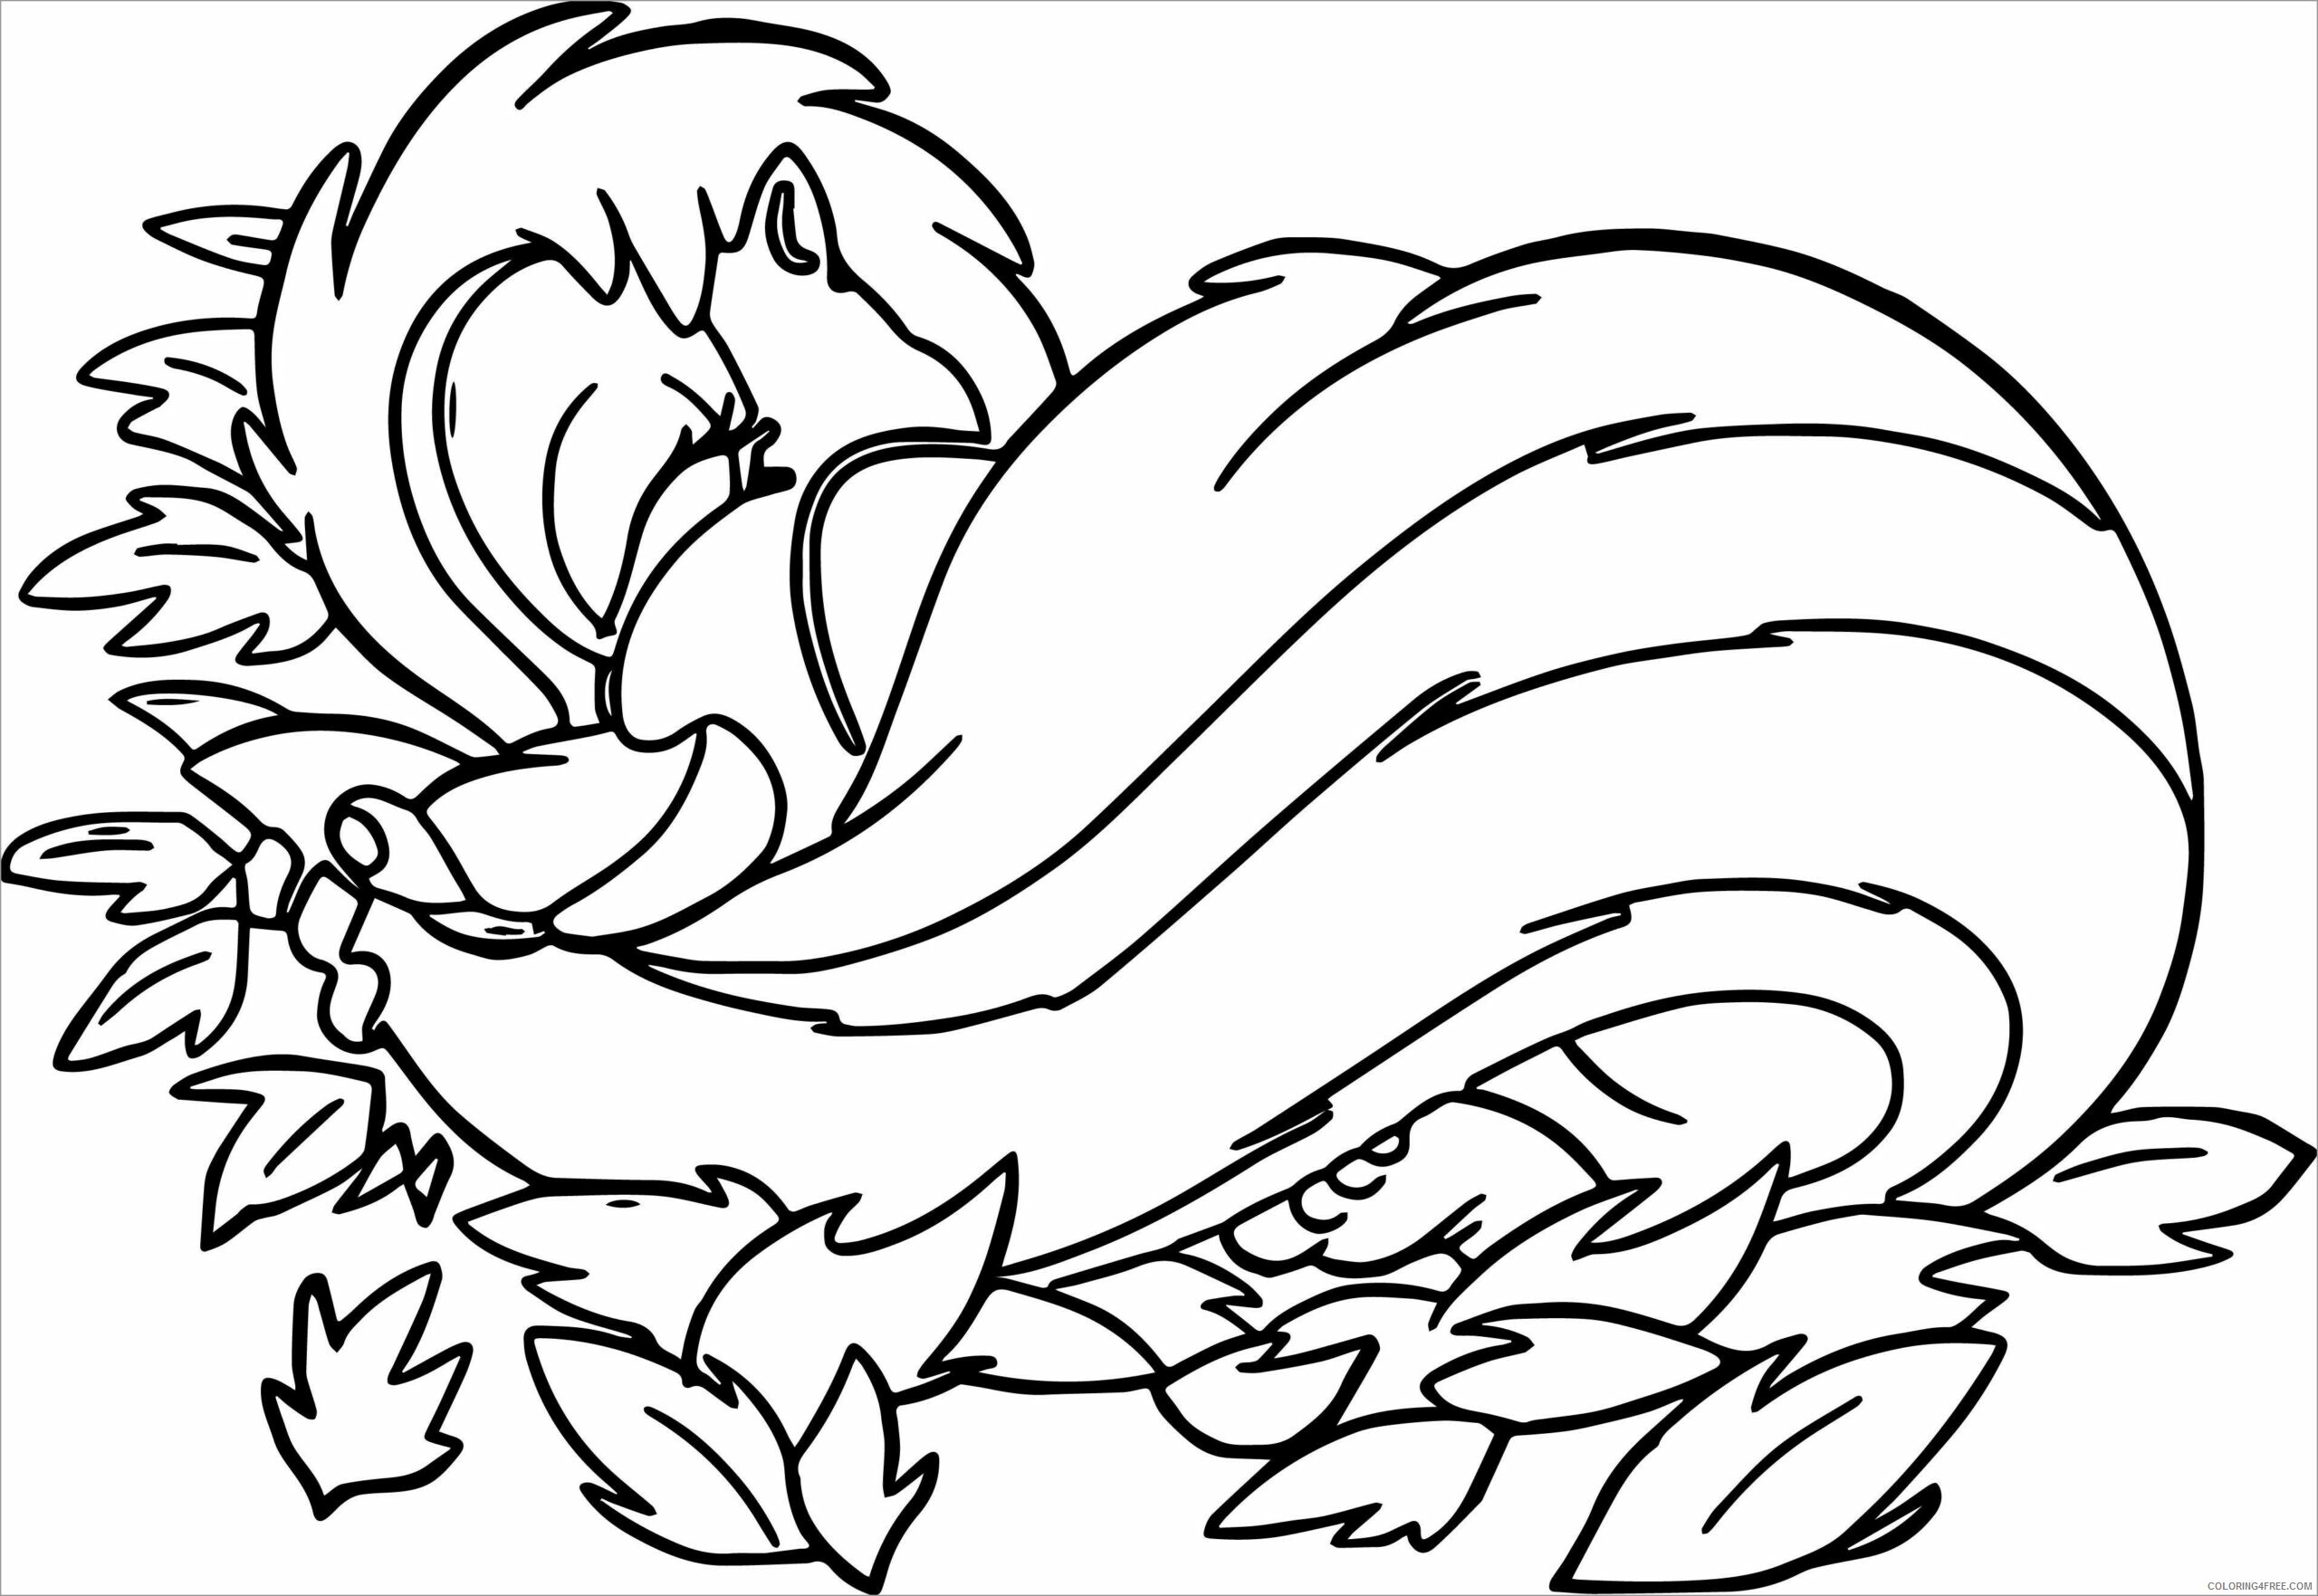 Skunk Coloring Pages Animal Printable Sheets flower the skunk 2021 4515 Coloring4free